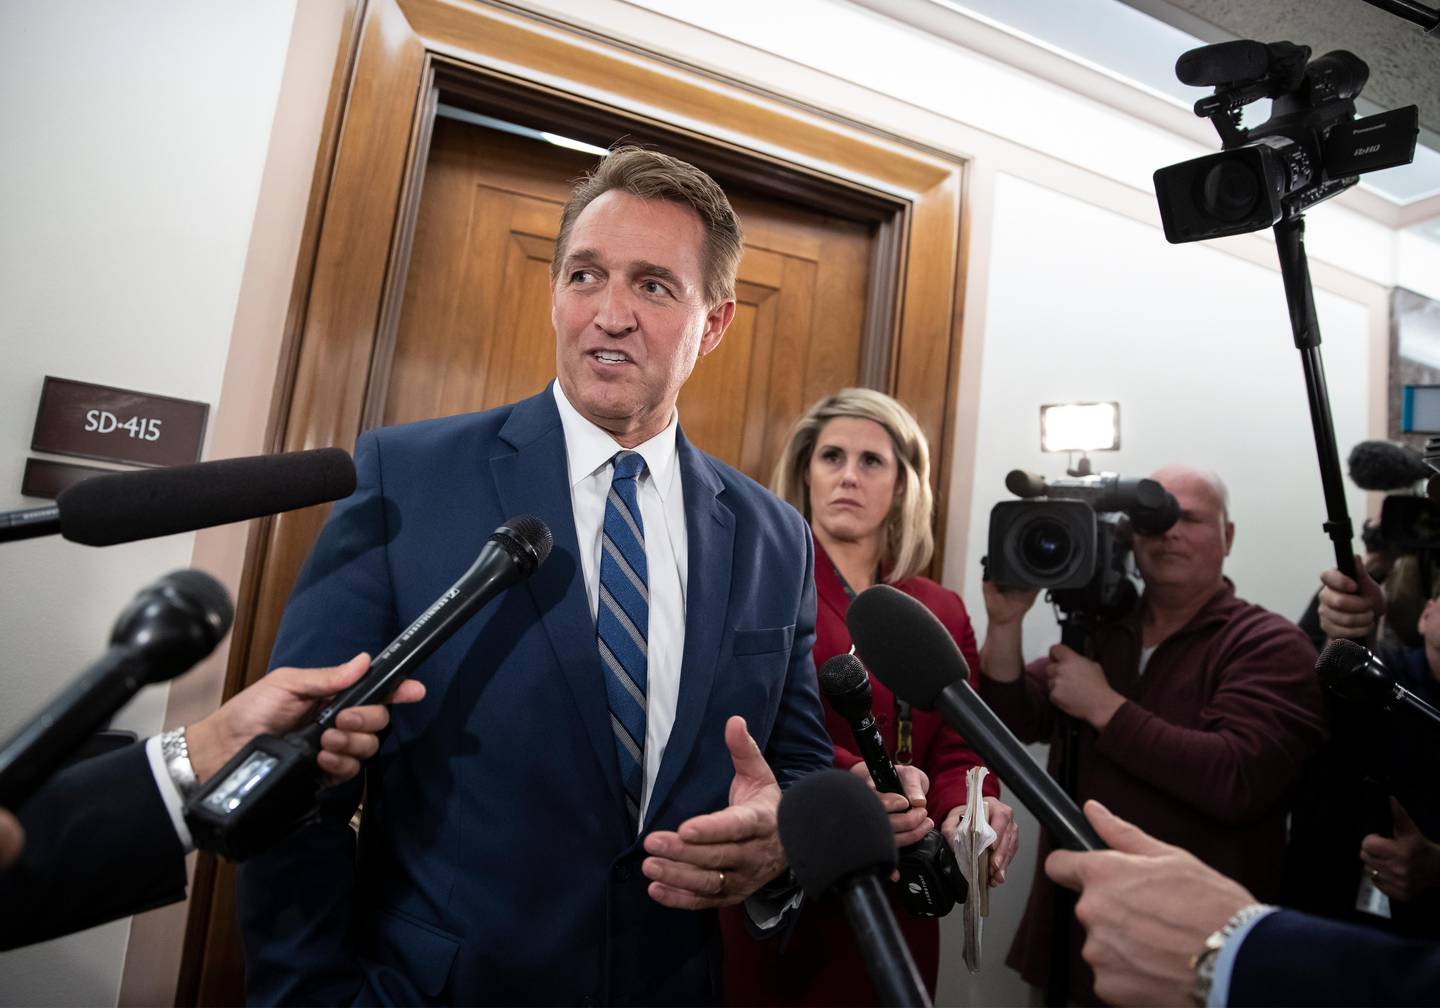 FILE- In this Dec. 6, 2018, file photo, Sen. Jeff Flake, R-Ariz., speaks with reporters on Capitol Hill in Washington.  President Donald Trump?Äôs most prominent GOP critics on Capitol Hill are days away from completing their Senate careers, raising the question of who will take their place as willing to publicly criticize a president who remains popular with Republican voters. Sens. Jeff Flake of Arizona and Bob Corker of Tennessee engaged in a war of words with the president on myriad issues over the past 18 months, generating headlines and fiery tweets from a president who insists on getting the last word. (AP Photo/J. Scott Applewhite, File)